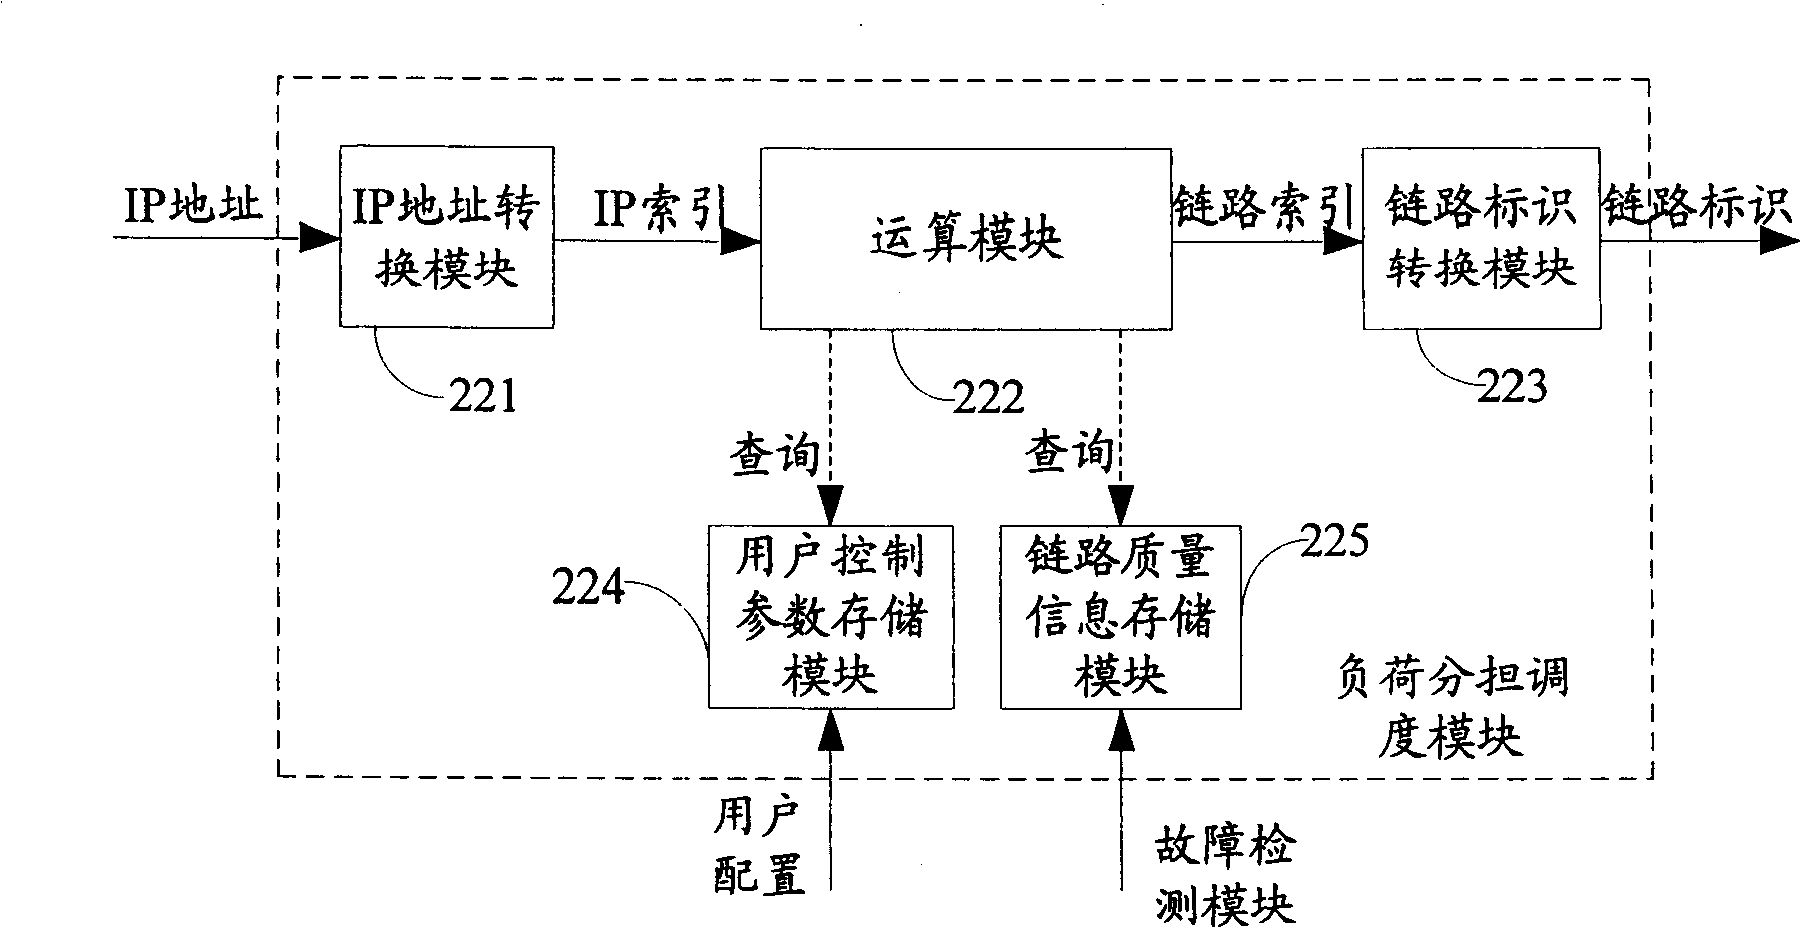 Load sharing apparatus and method for realizing multi-chain circuit transmission